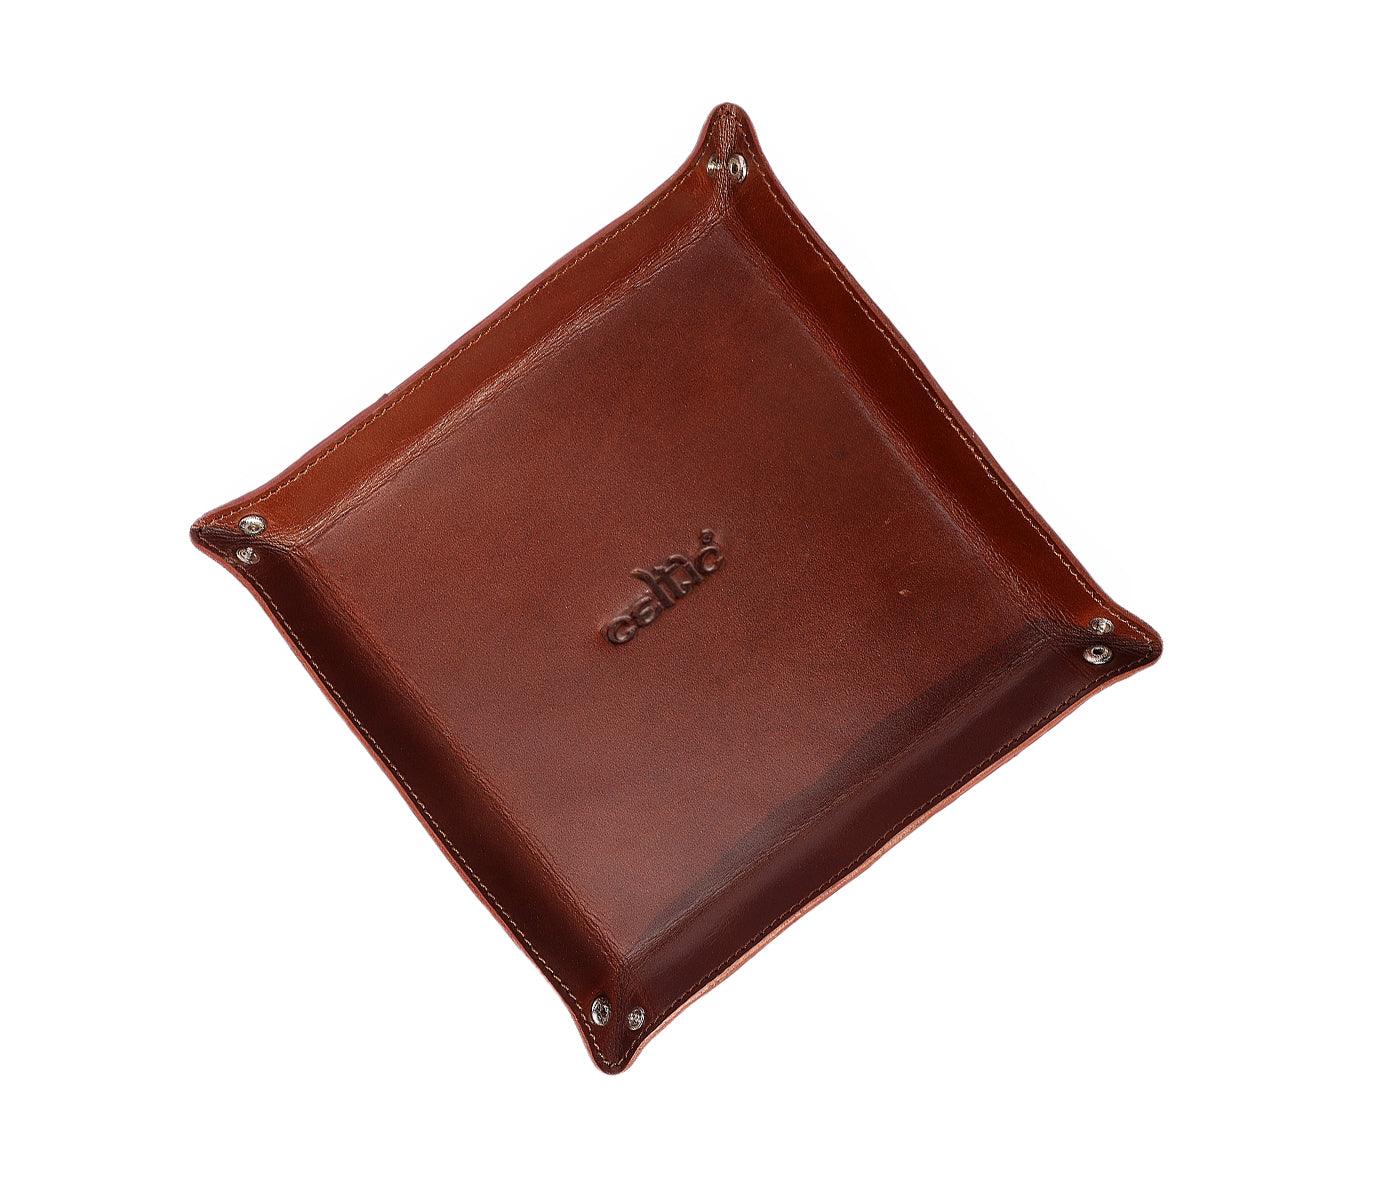 Celtic Brown Color Pure Leather Tray For Office Use - CELTICINDIA